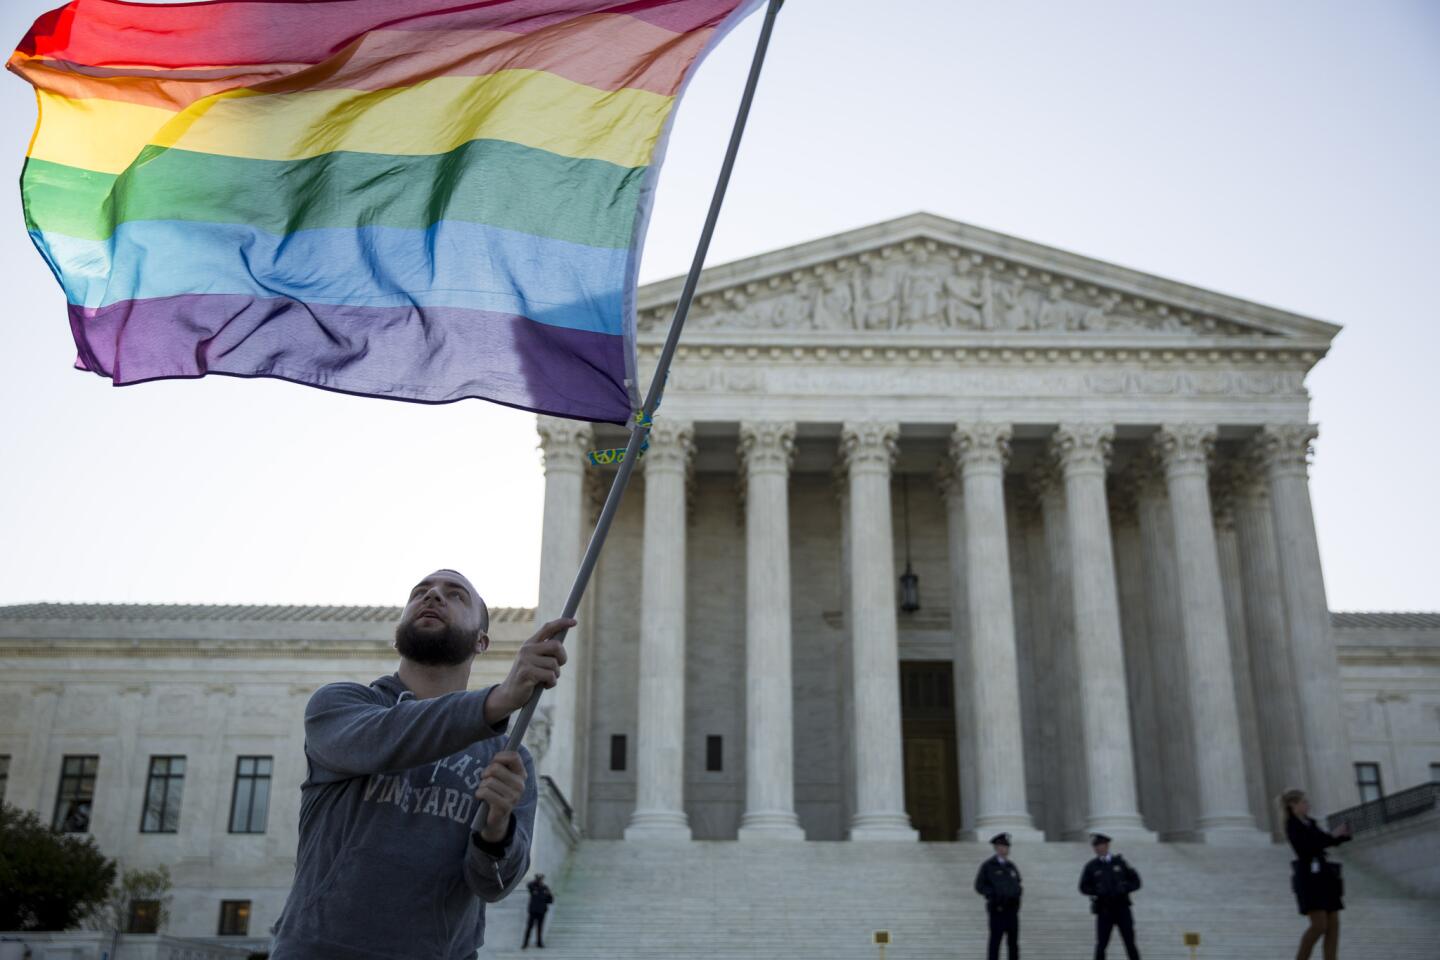 Same-sex marriage supporter Vin Testa waves a rainbow pride flag near the Supreme Court in Washington, DC. On Tuesday the Supreme Court will hear arguments concerning whether same-sex marriage is a constitutional right, with decisions expected in June.